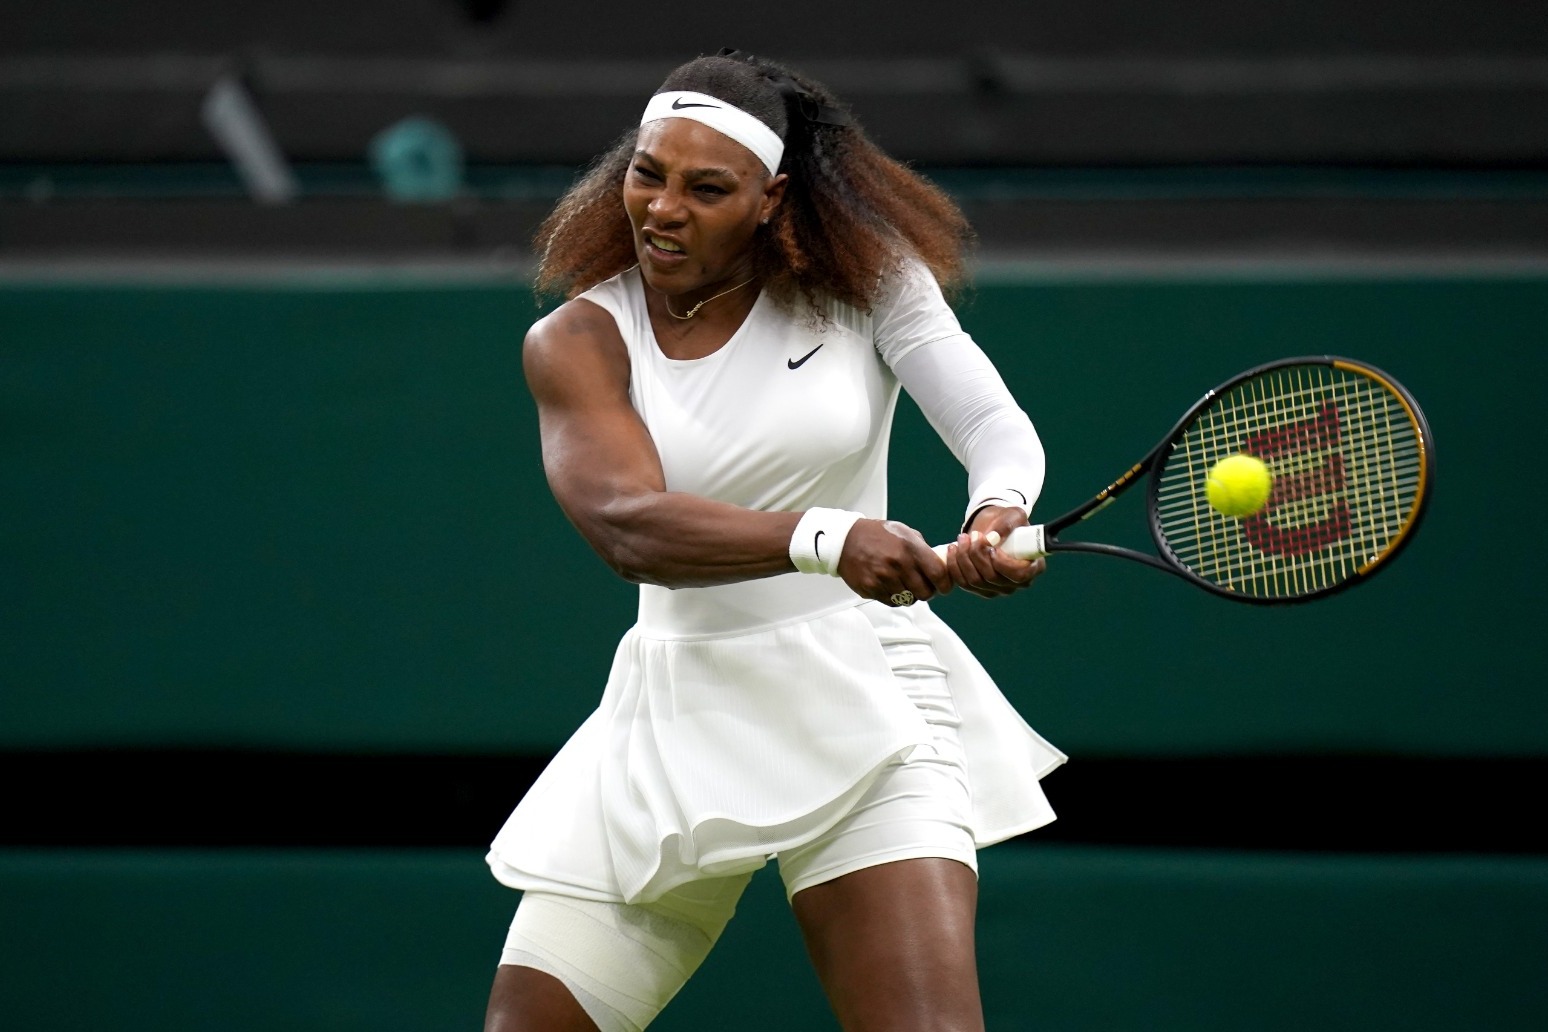 Serena Williams had doubts over her playing career before making winning return 